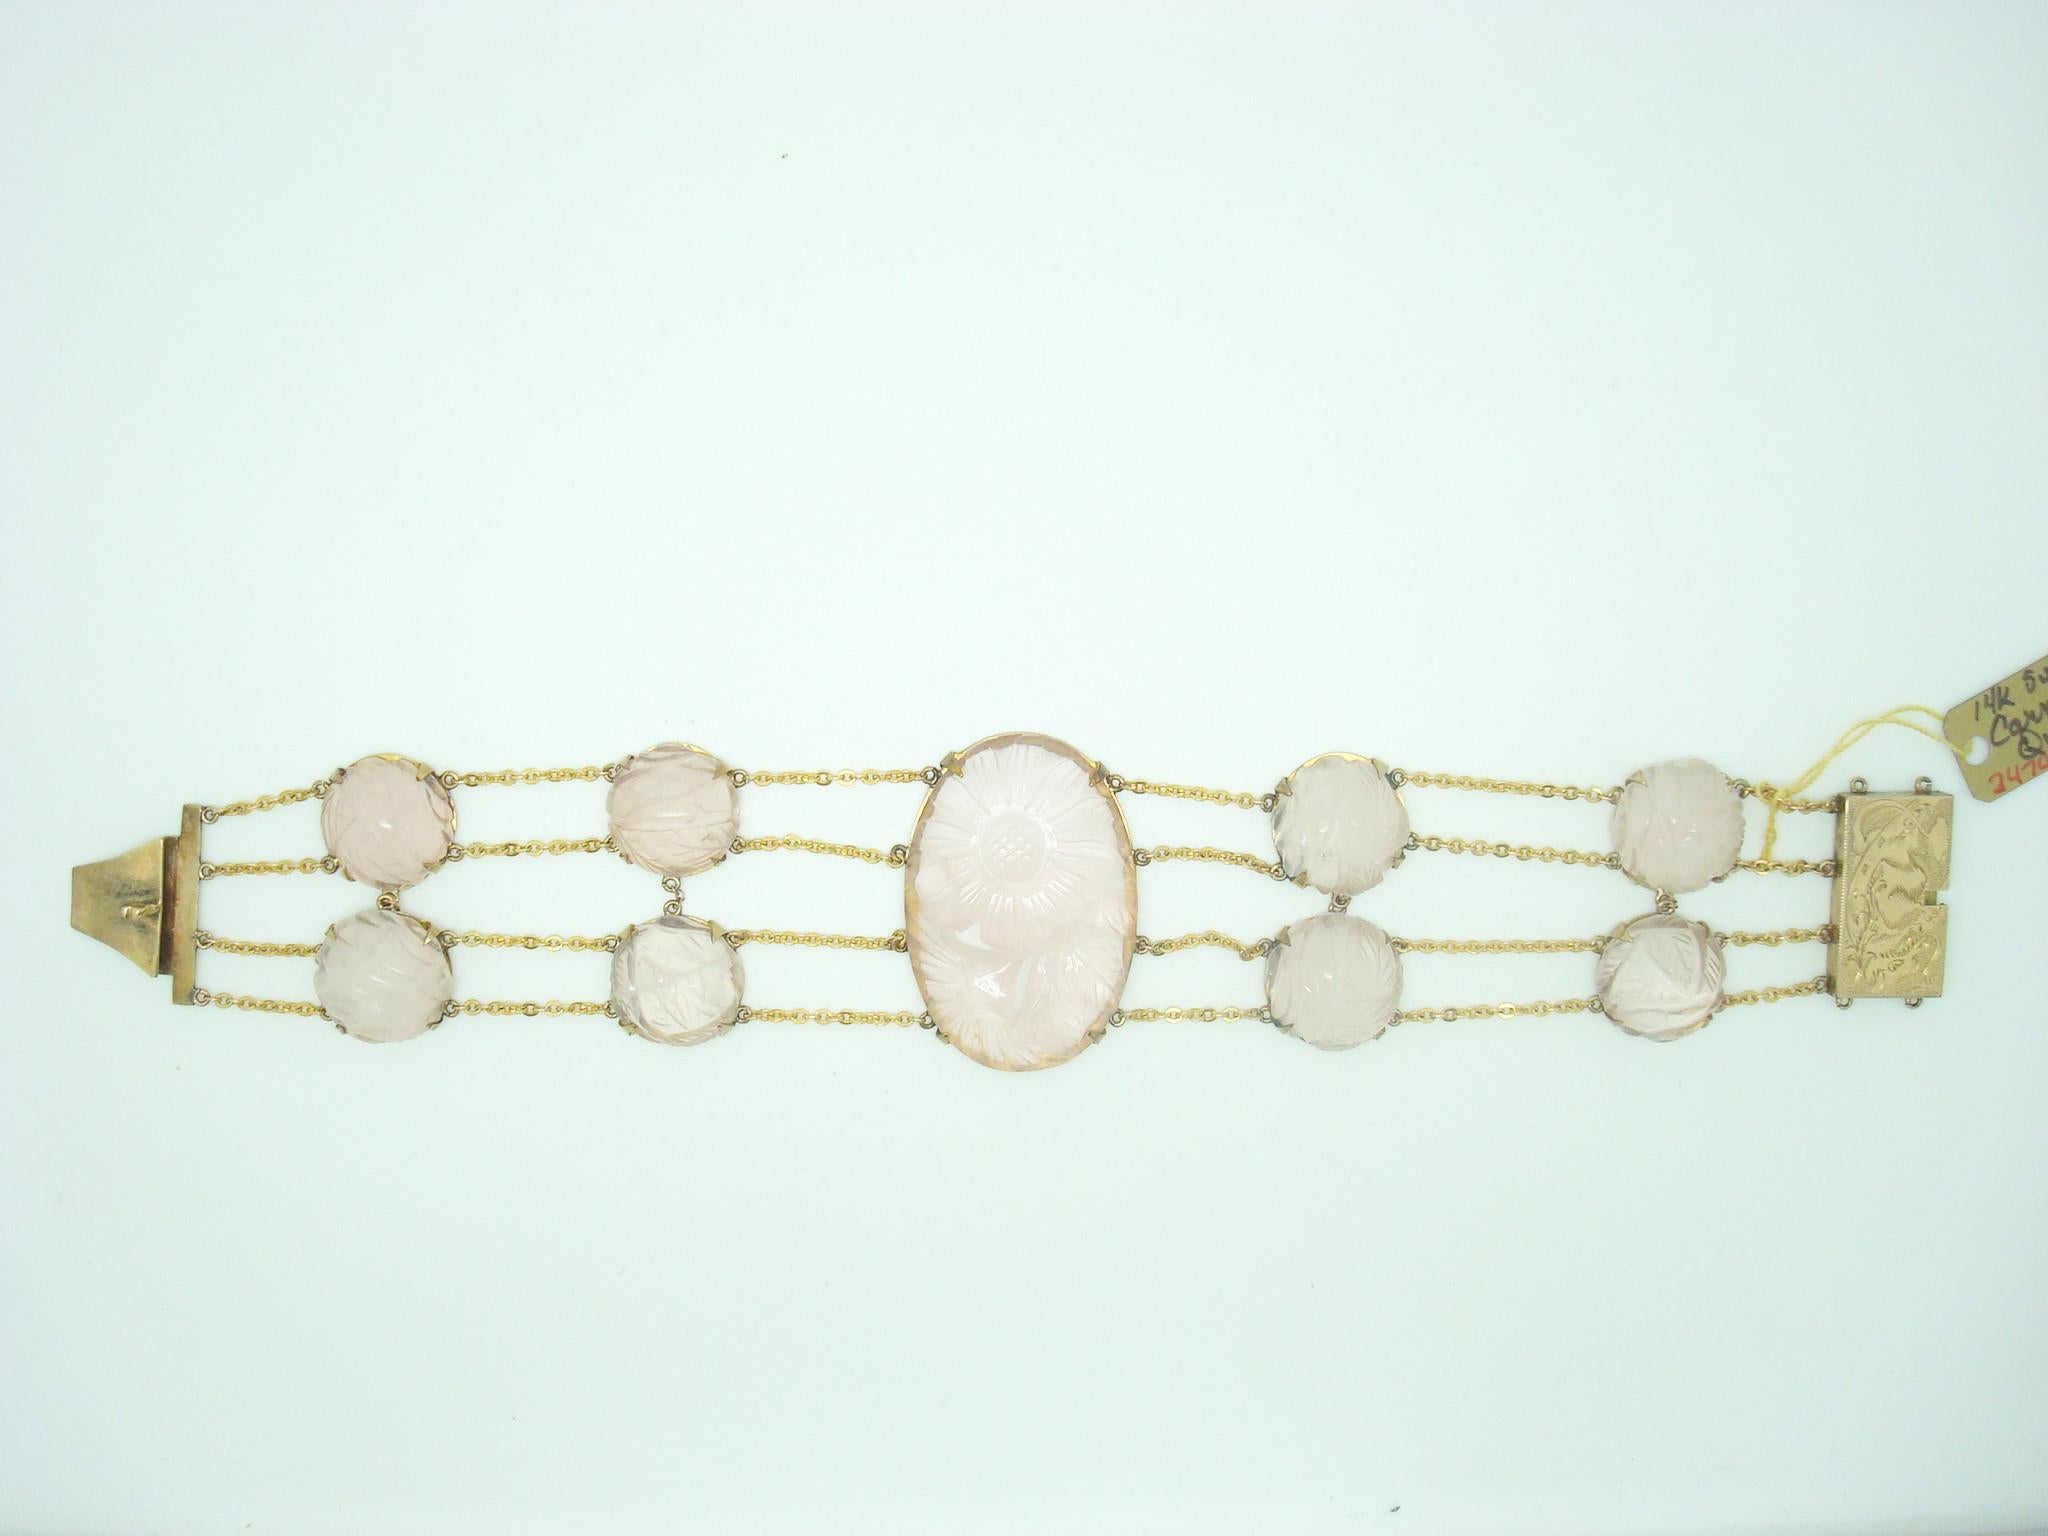 14k Gold Genuine Natural Rose Quartz Bracelet and Earring Set (#J2470)

Gorgeous 14k yellow gold bracelet and earring set featuring lovely carved rose quartz. There is an oval rose quartz set in the center of the bracelet, which measures 36x25mm,